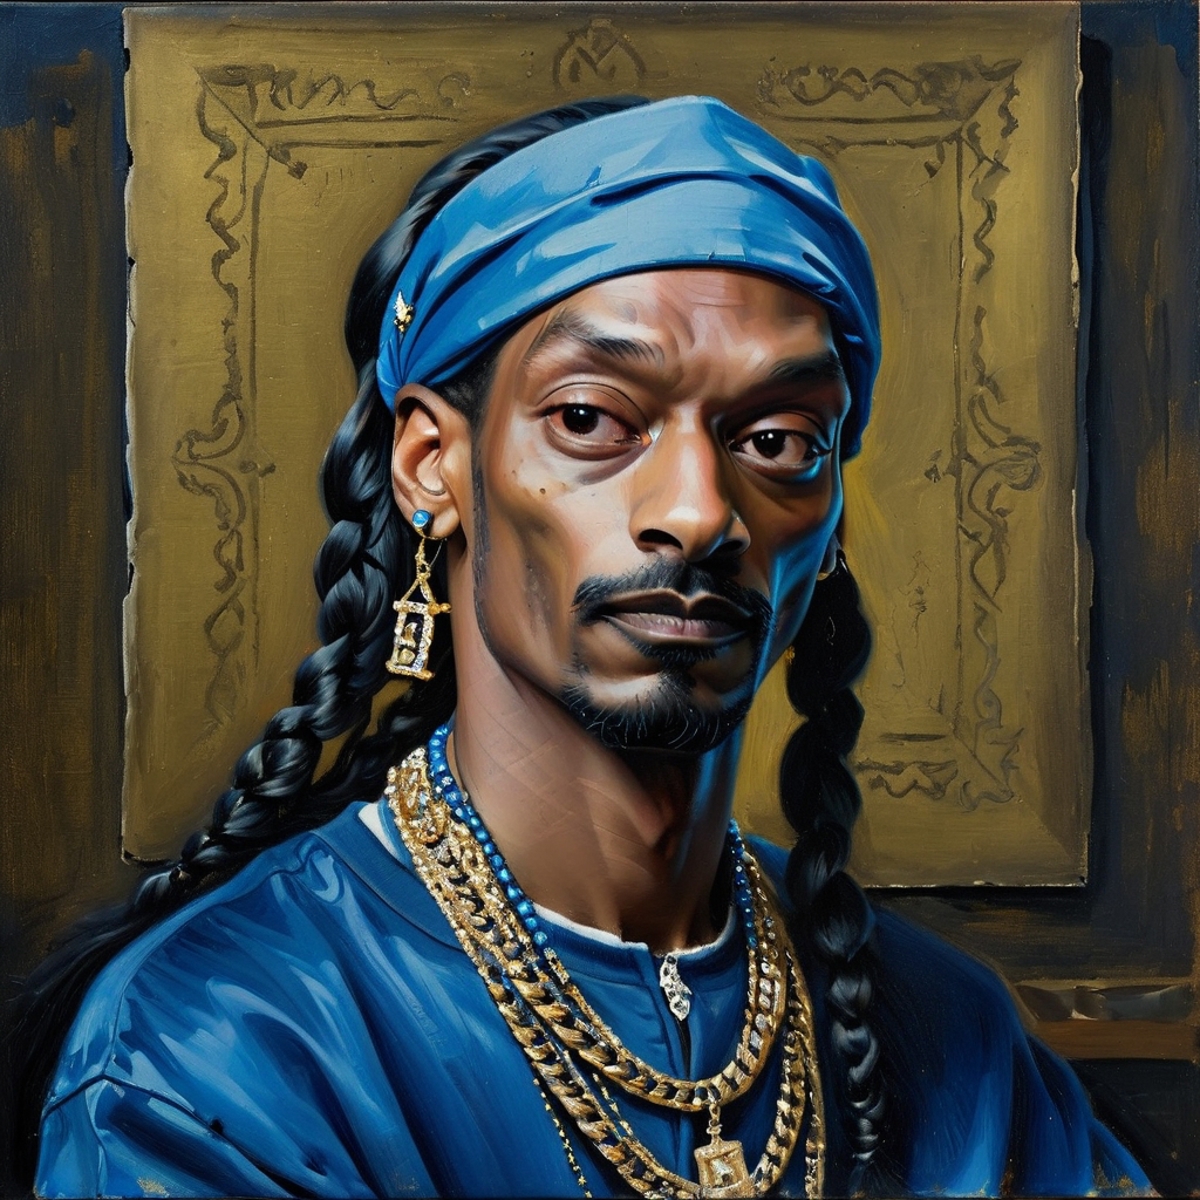 Painting of a man with dreadlocks wearing a blue turban and gold necklace.